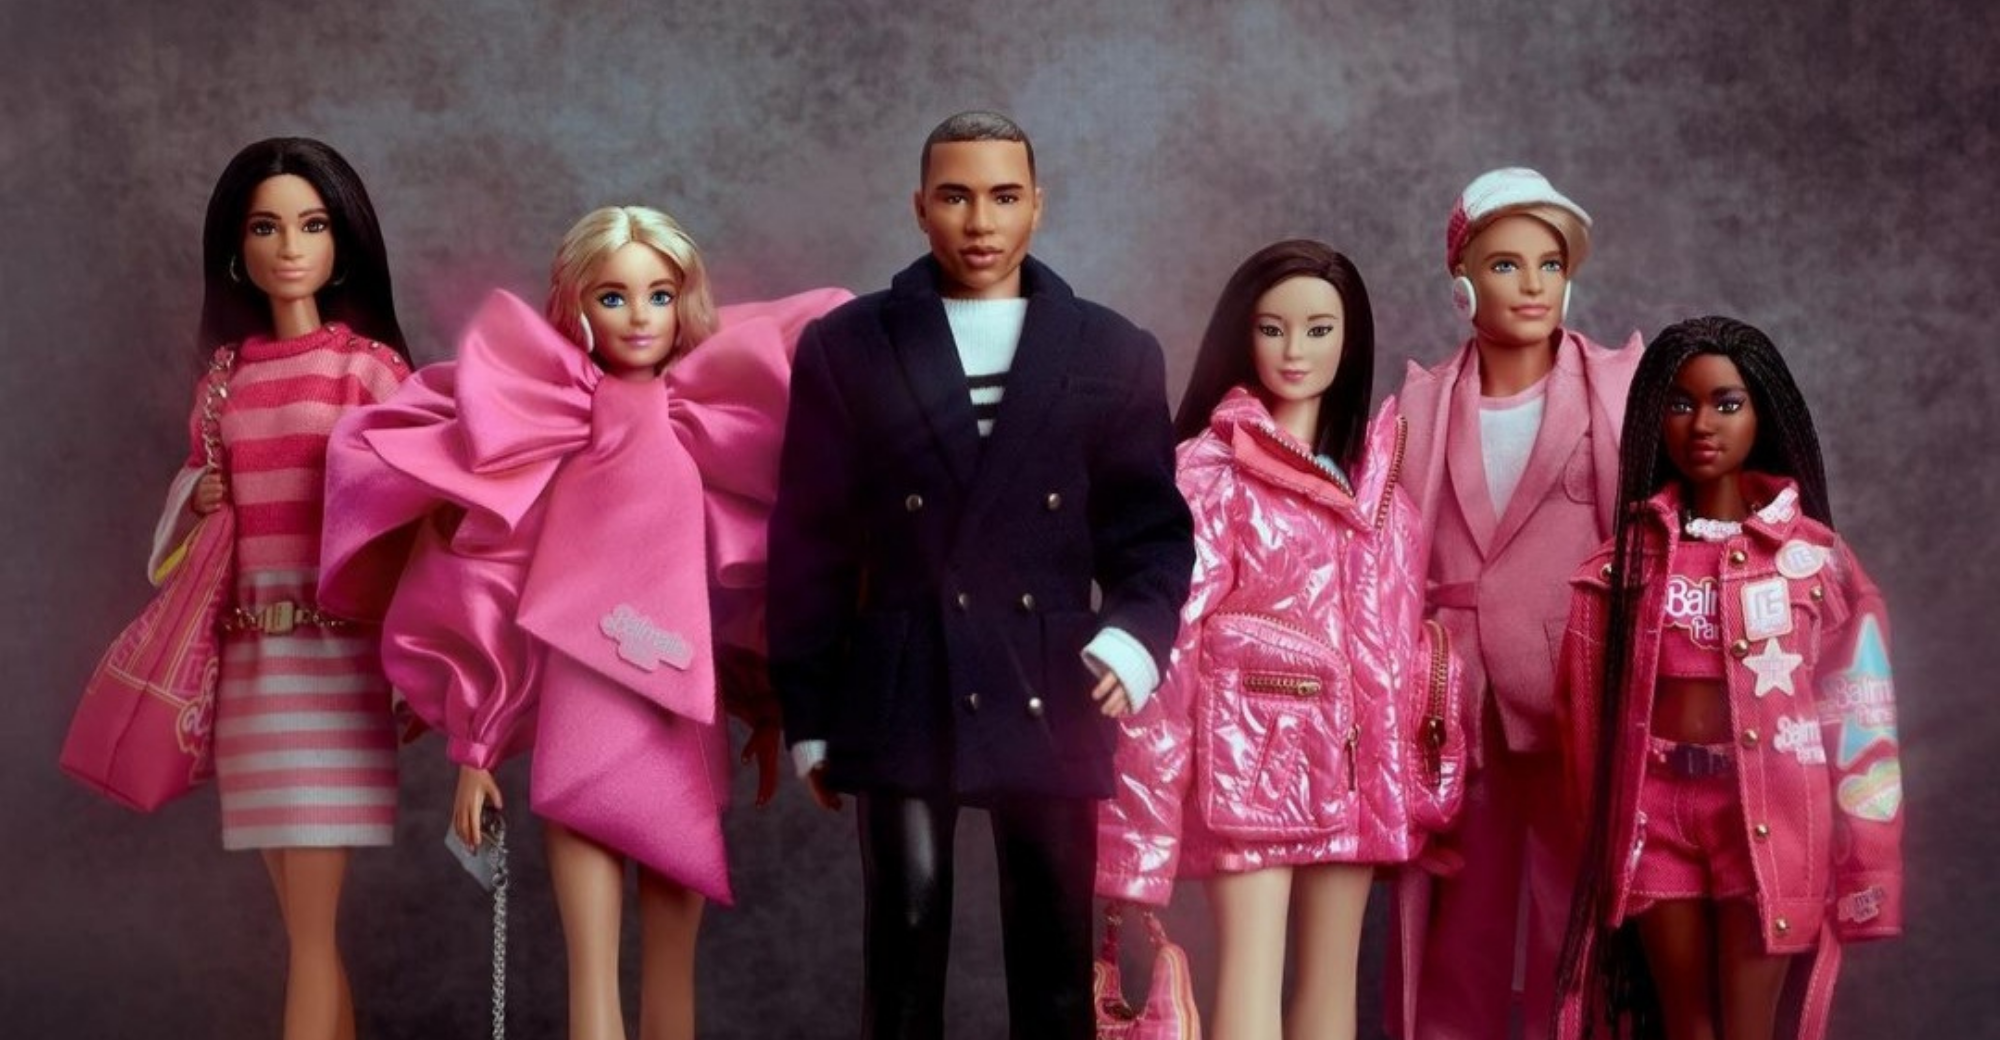 Barbie's Best Fashion Collaborations of All Time